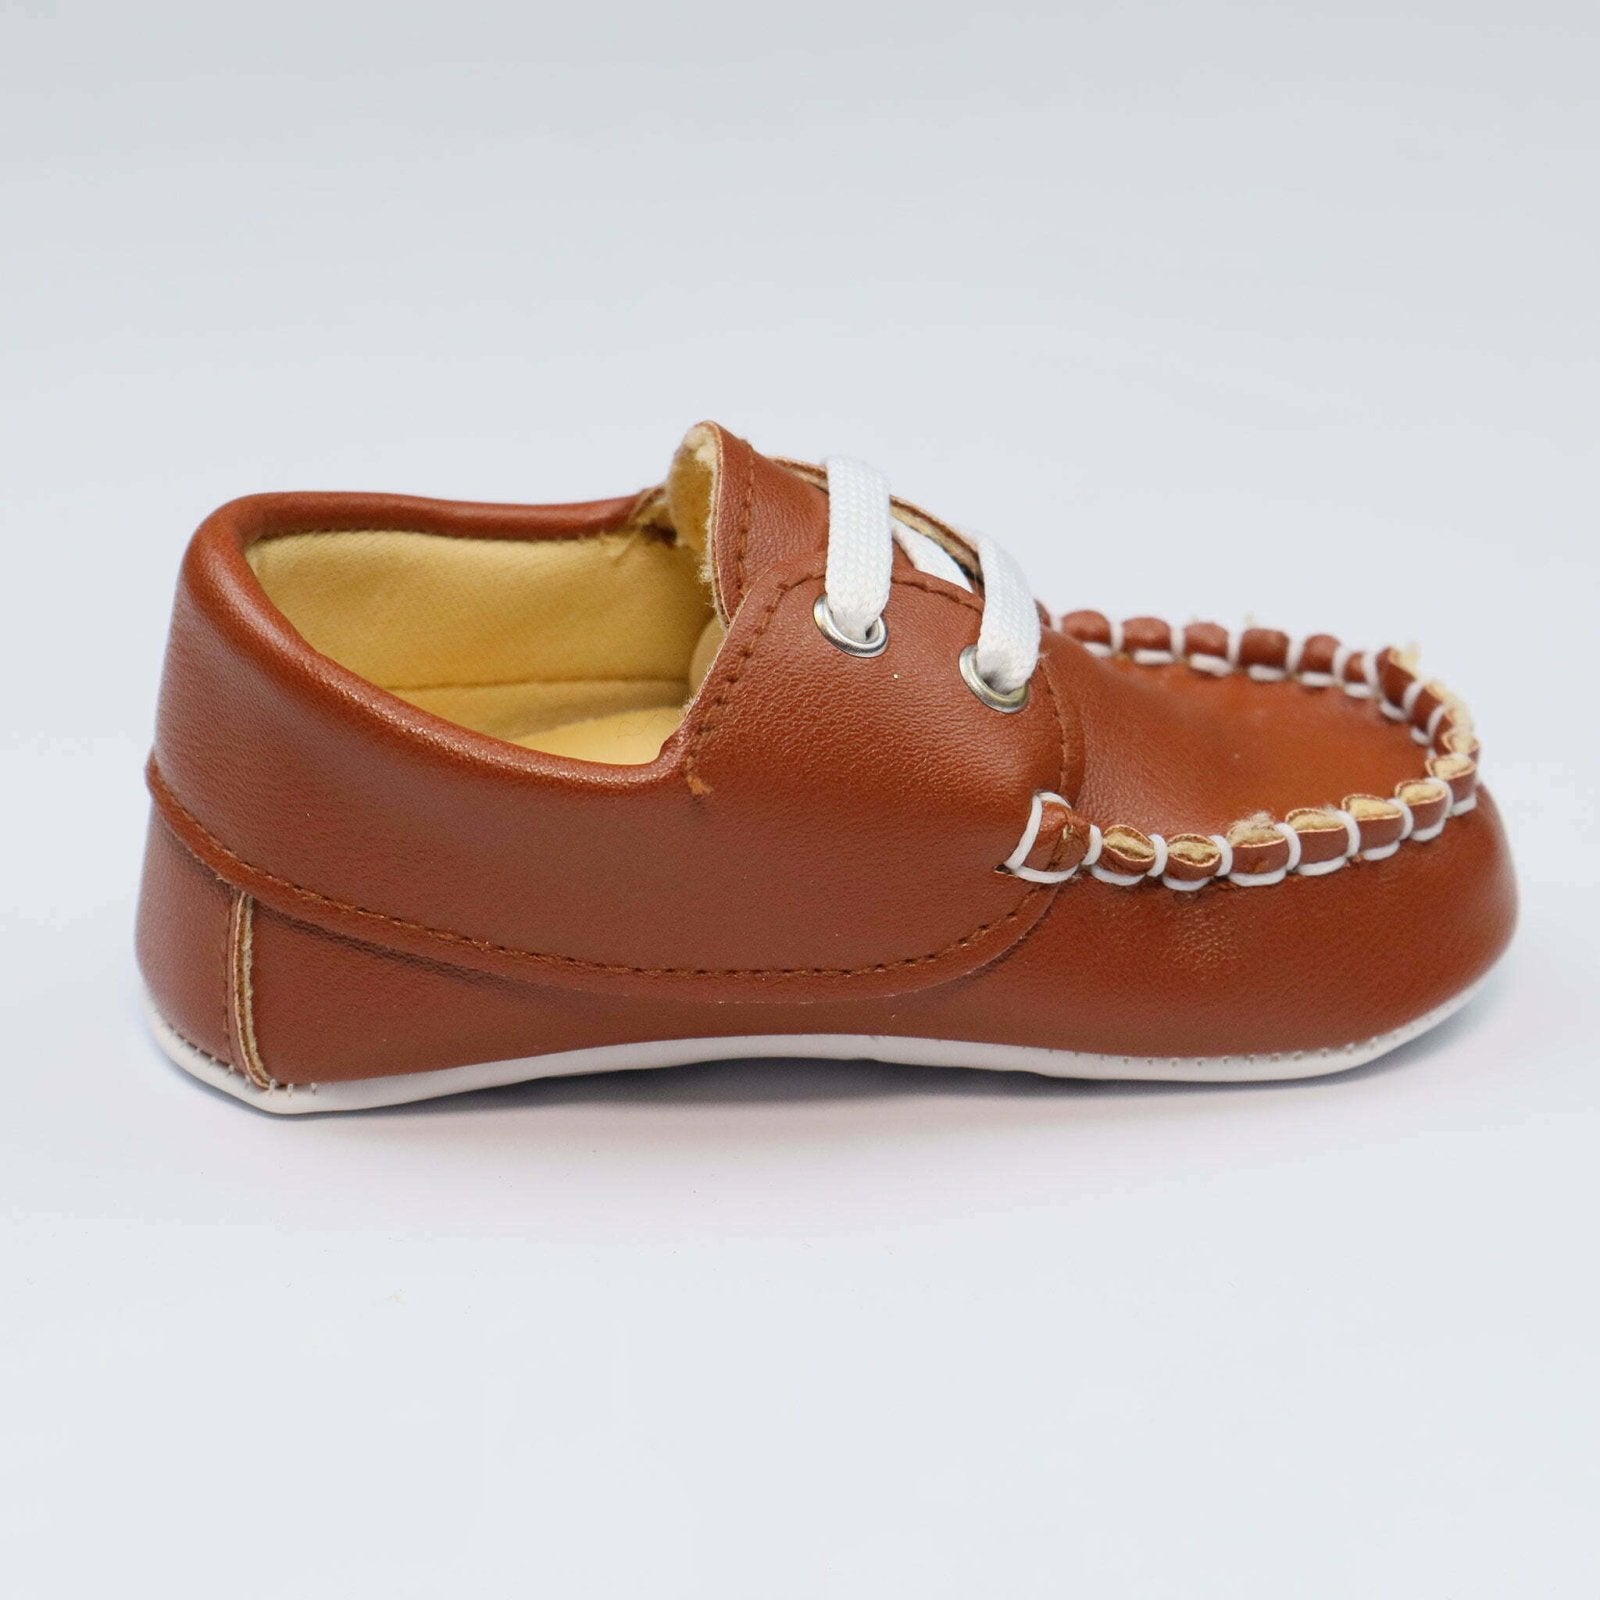 Baby Shoes Chocolate Brown Color With White Laces by Baby Pattini